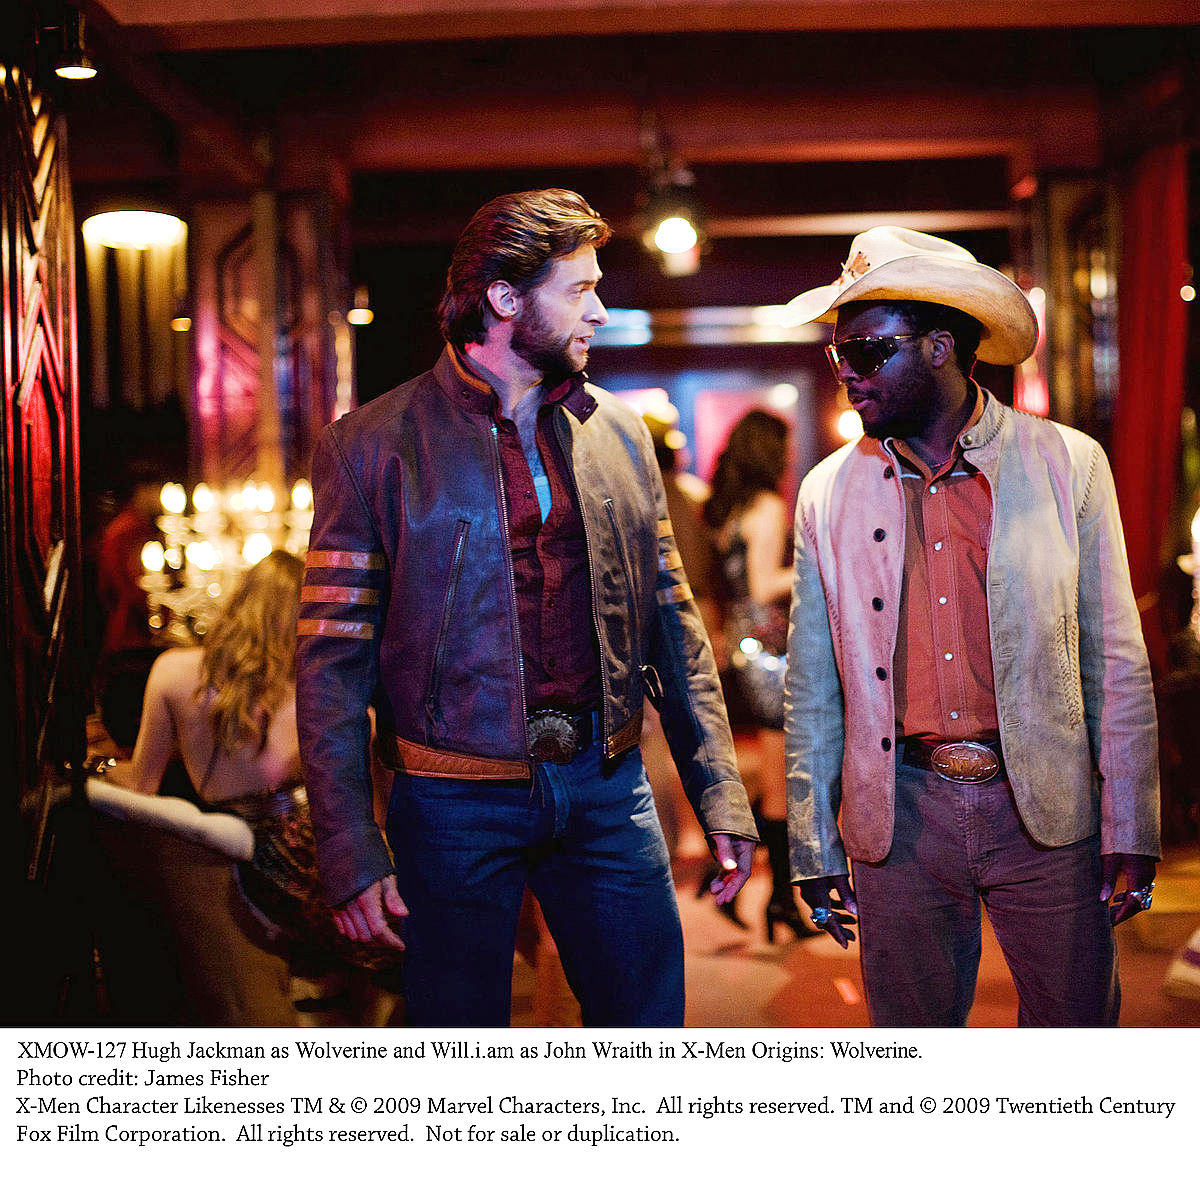 Hugh Jackman stars as Logan/Wolverine and will.i.am stars as John Wraith in The 20th Century Fox Pictures' X-Men Origins: Wolverine (2009). Photo credit by James Fisher.